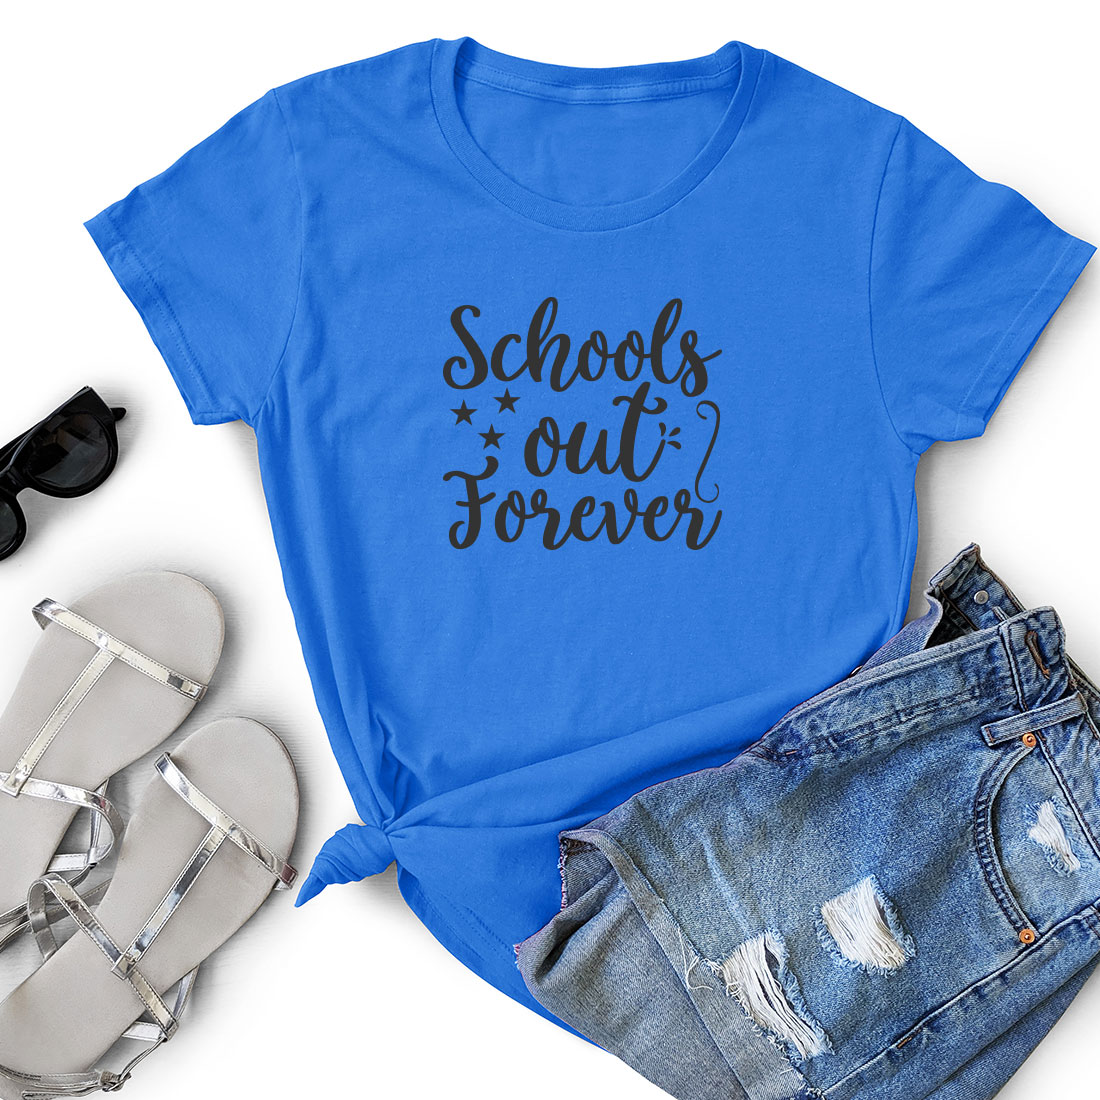 T - shirt that says school is out forever next to a pair of shorts.